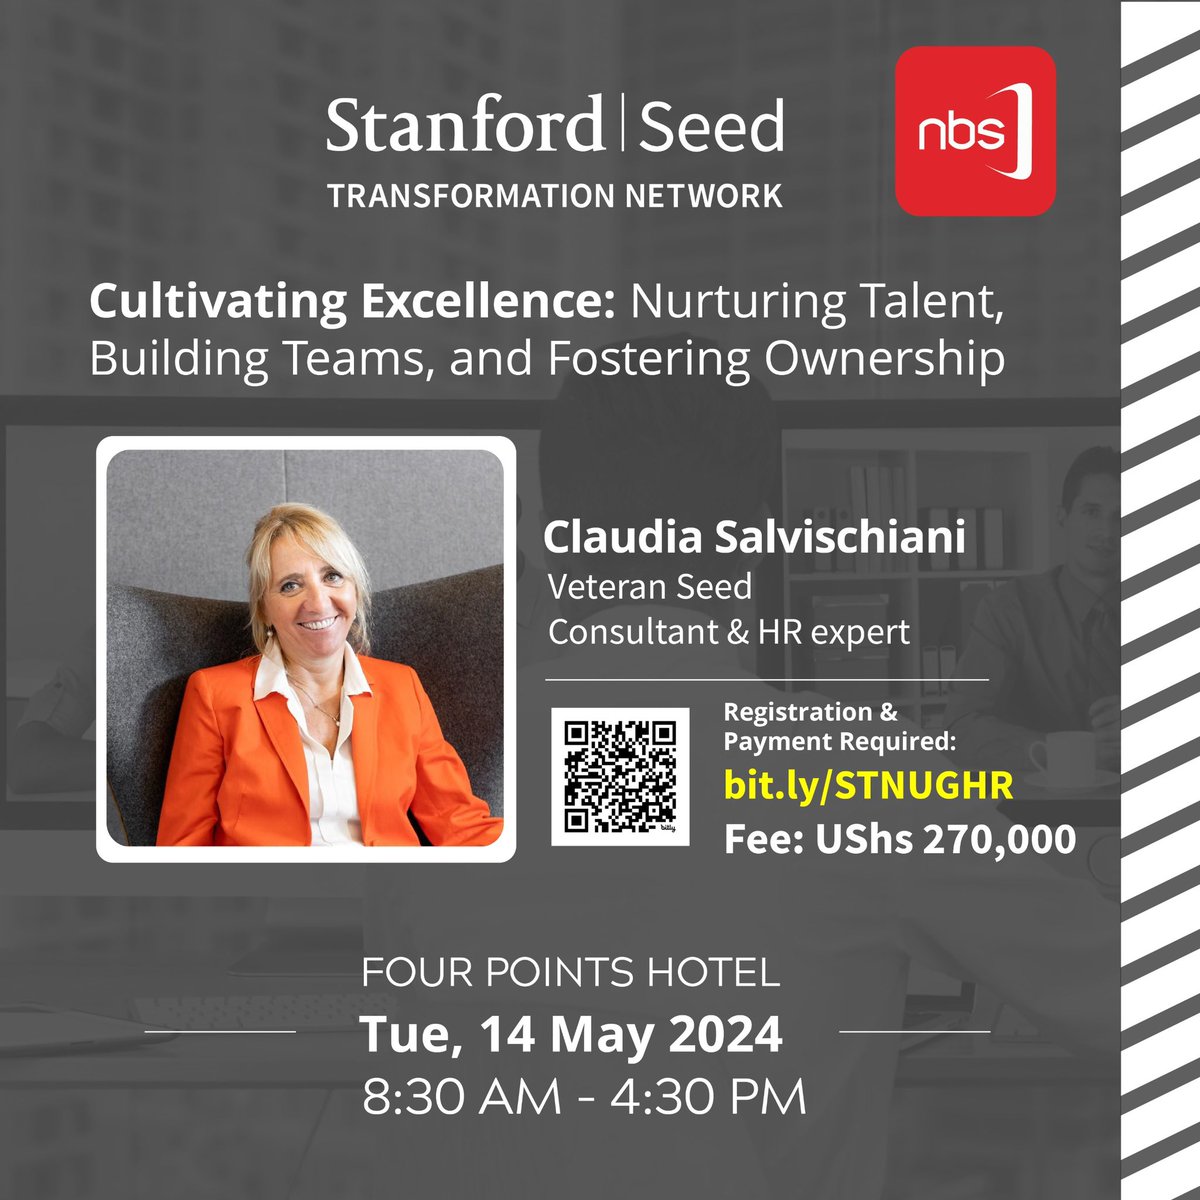 CEOs, it's time to shape the future of your organization! Join us on May 14th at Four Points Hotel for a transformative session with Claudia Salvischiani. Elevate your team's performance and foster a culture of ownership.

#CEOLeadership #TeamBuilding #HRInsights